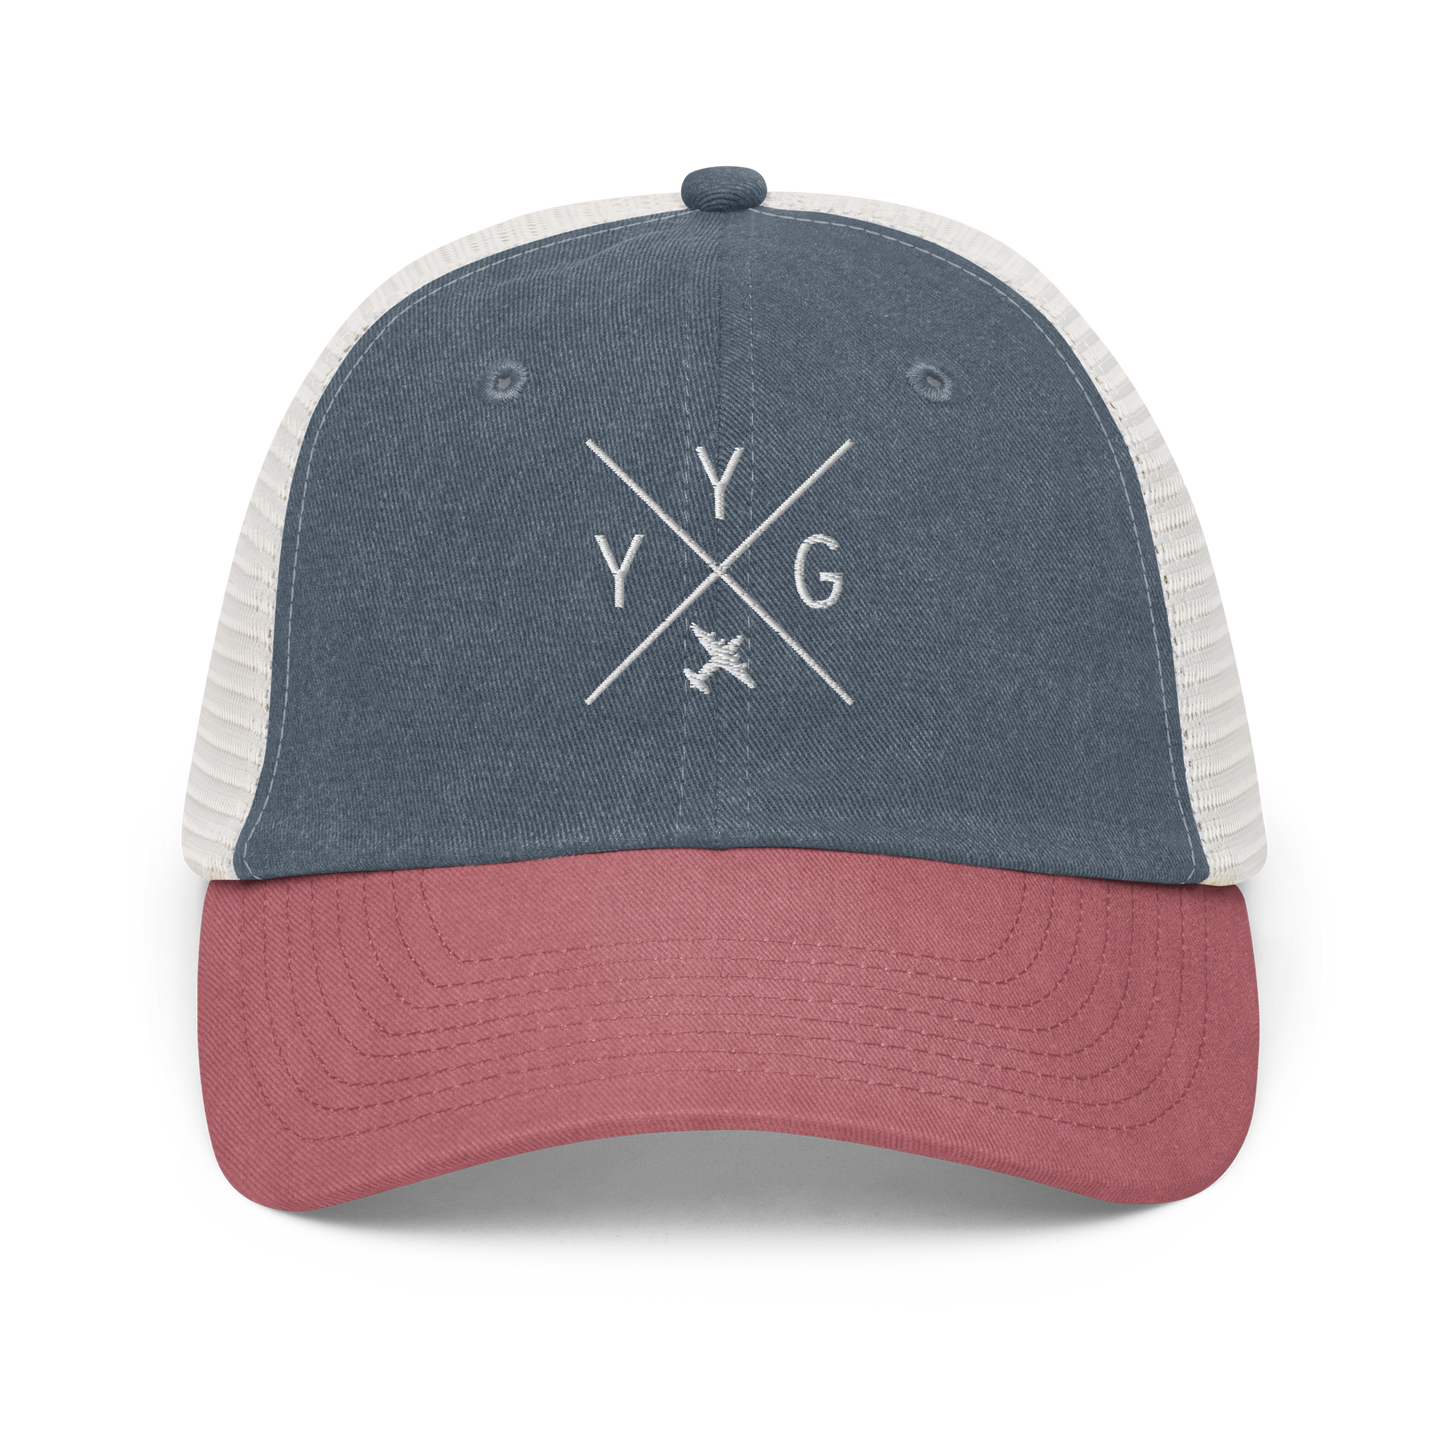 YHM Designs - YYG Charlottetown Pigment-Dyed Trucker Cap - Crossed-X Design with Airport Code and Vintage Propliner - White Embroidery - Image 12